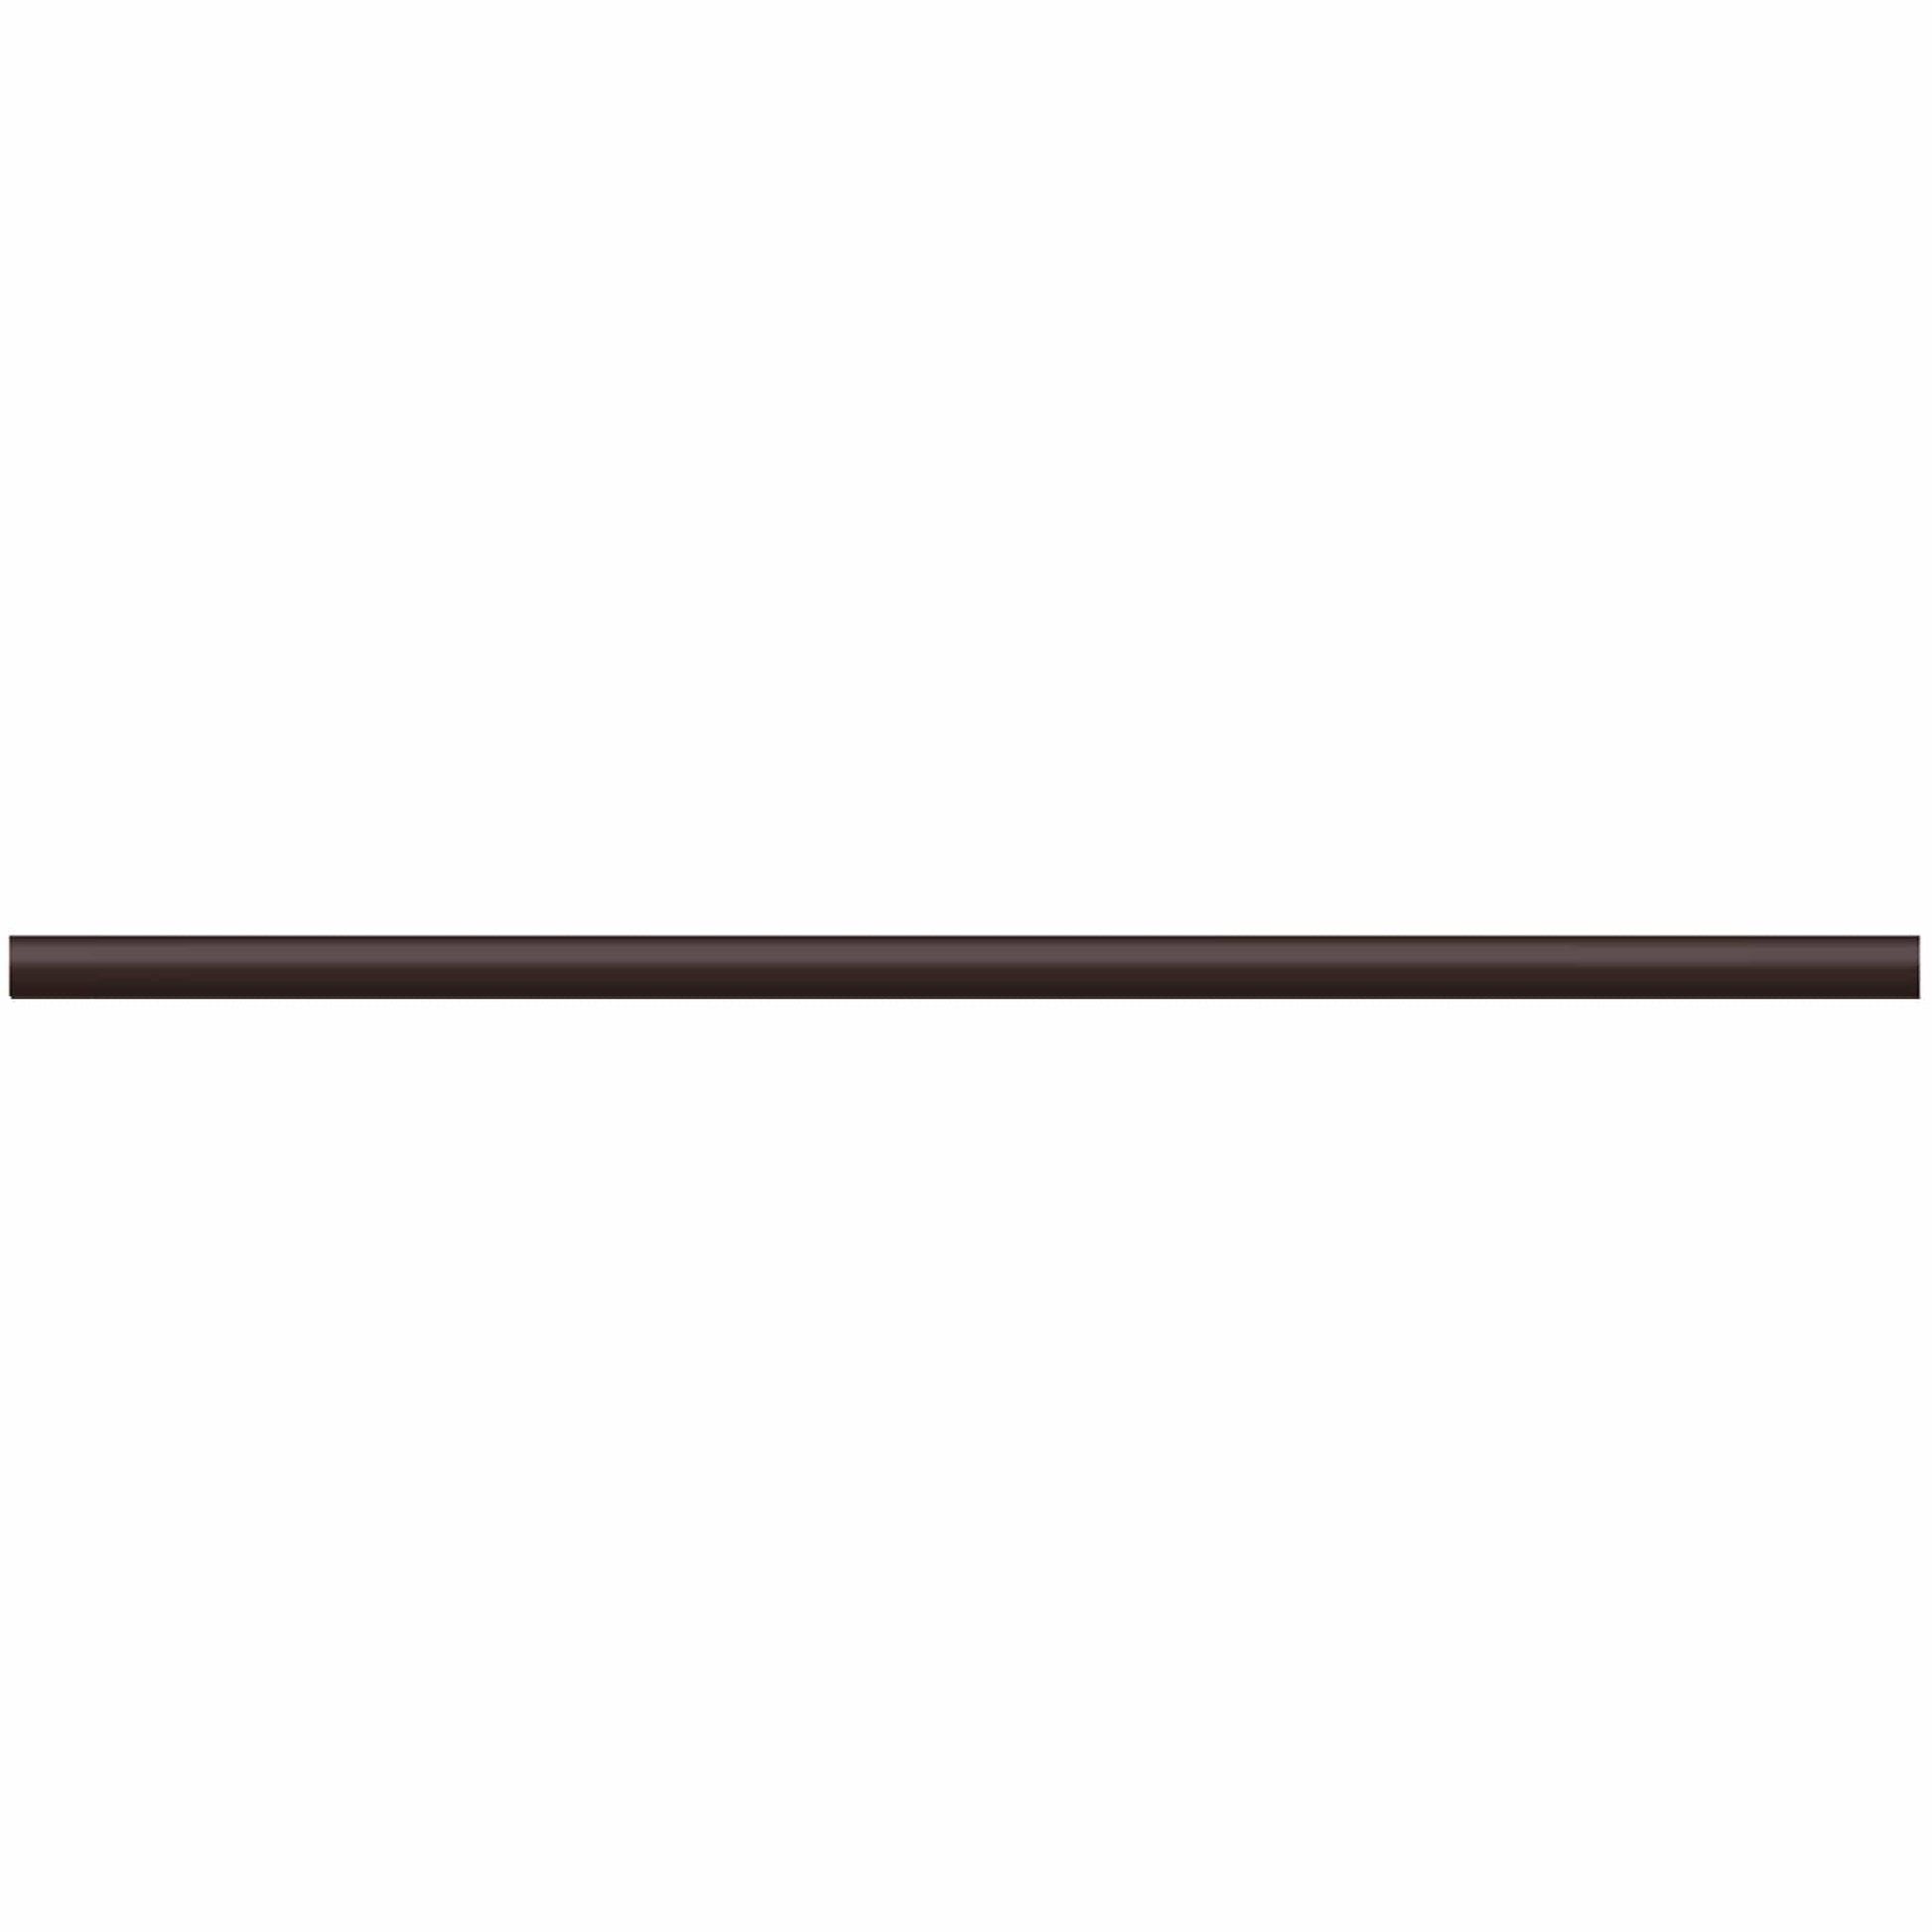 Copper Pony Poles Solid Rockweed Brown Pole - 10' ft Zero Maintenance (Polymer Wrapped Wood)